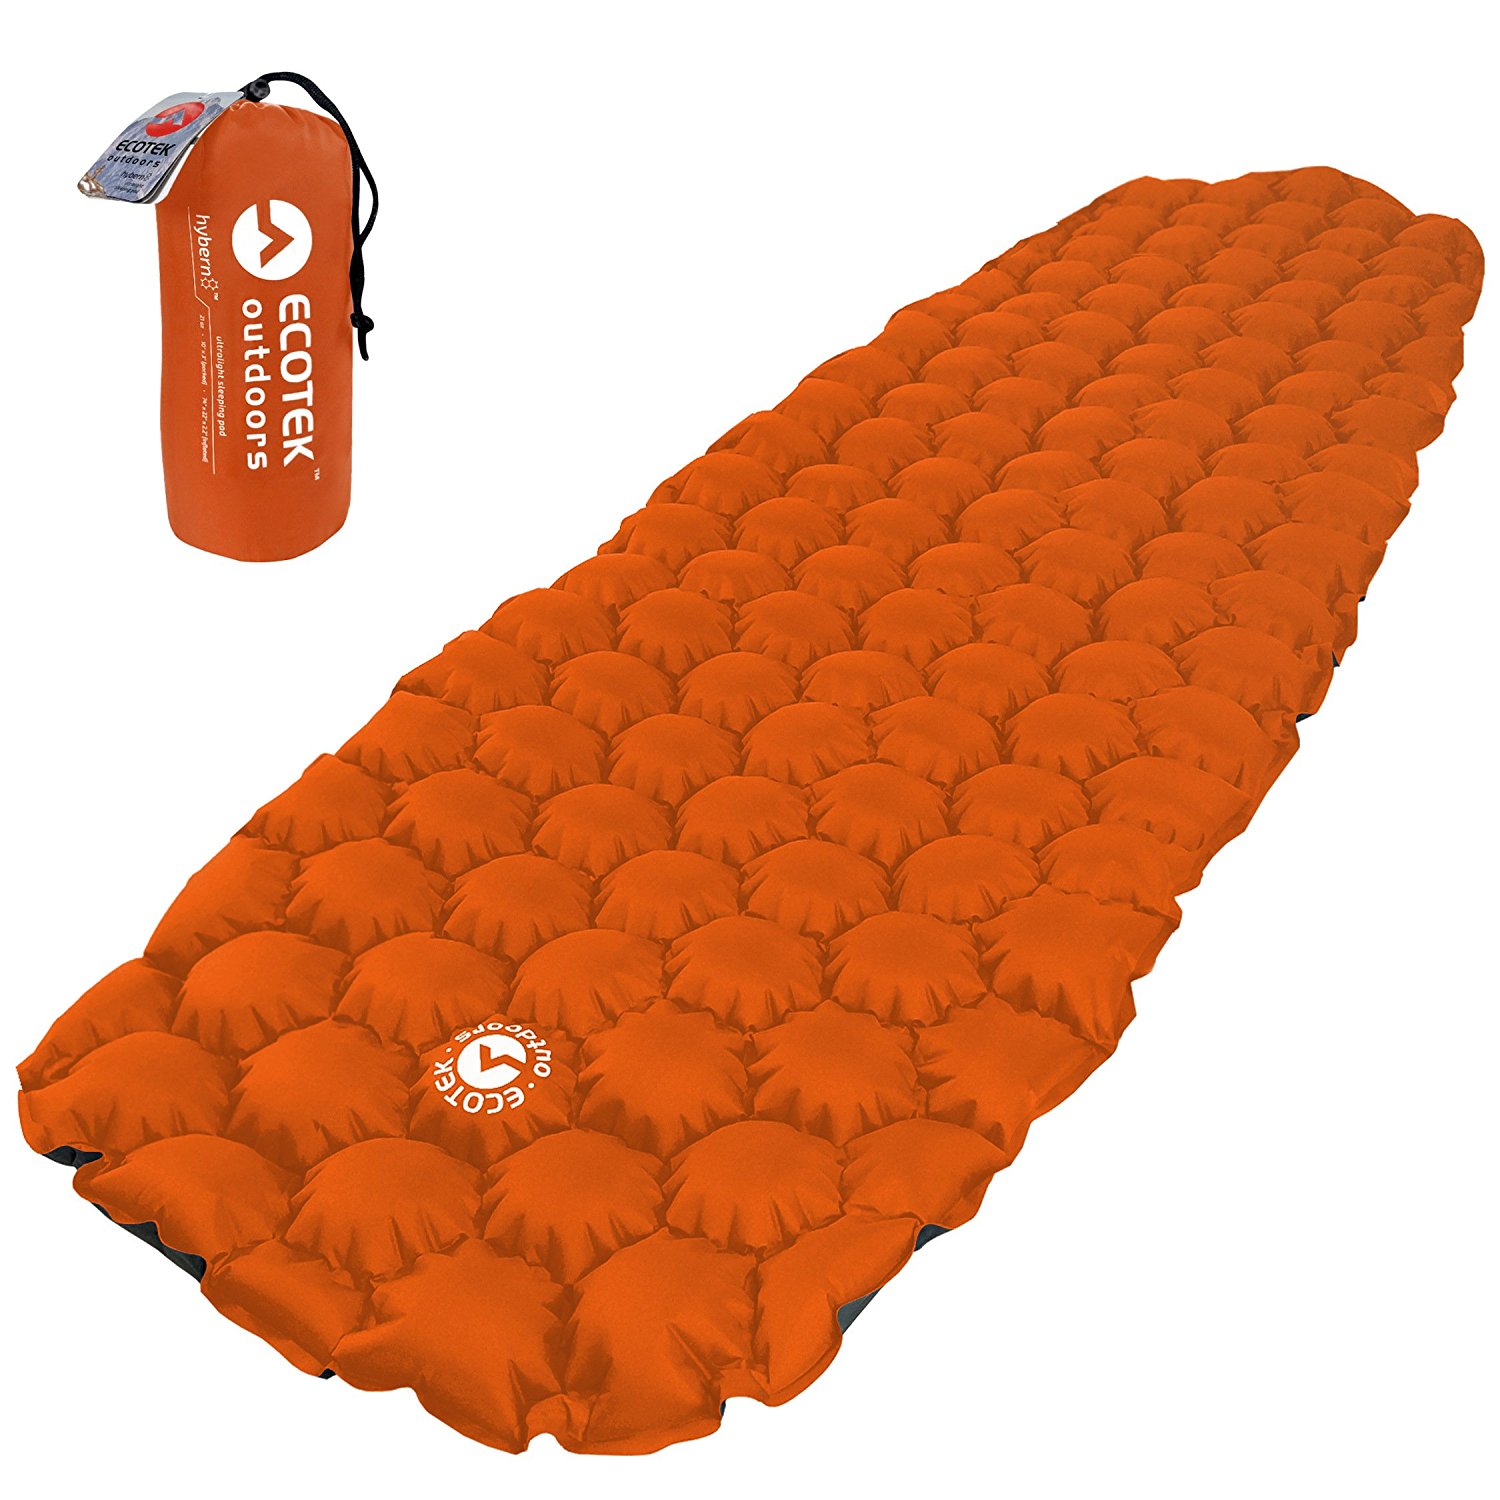 Outdoors Hybern8 Ultralight Inflatable Sleeping Pad with Contoured FlexCell Honeycomb Design _ Fire Orange